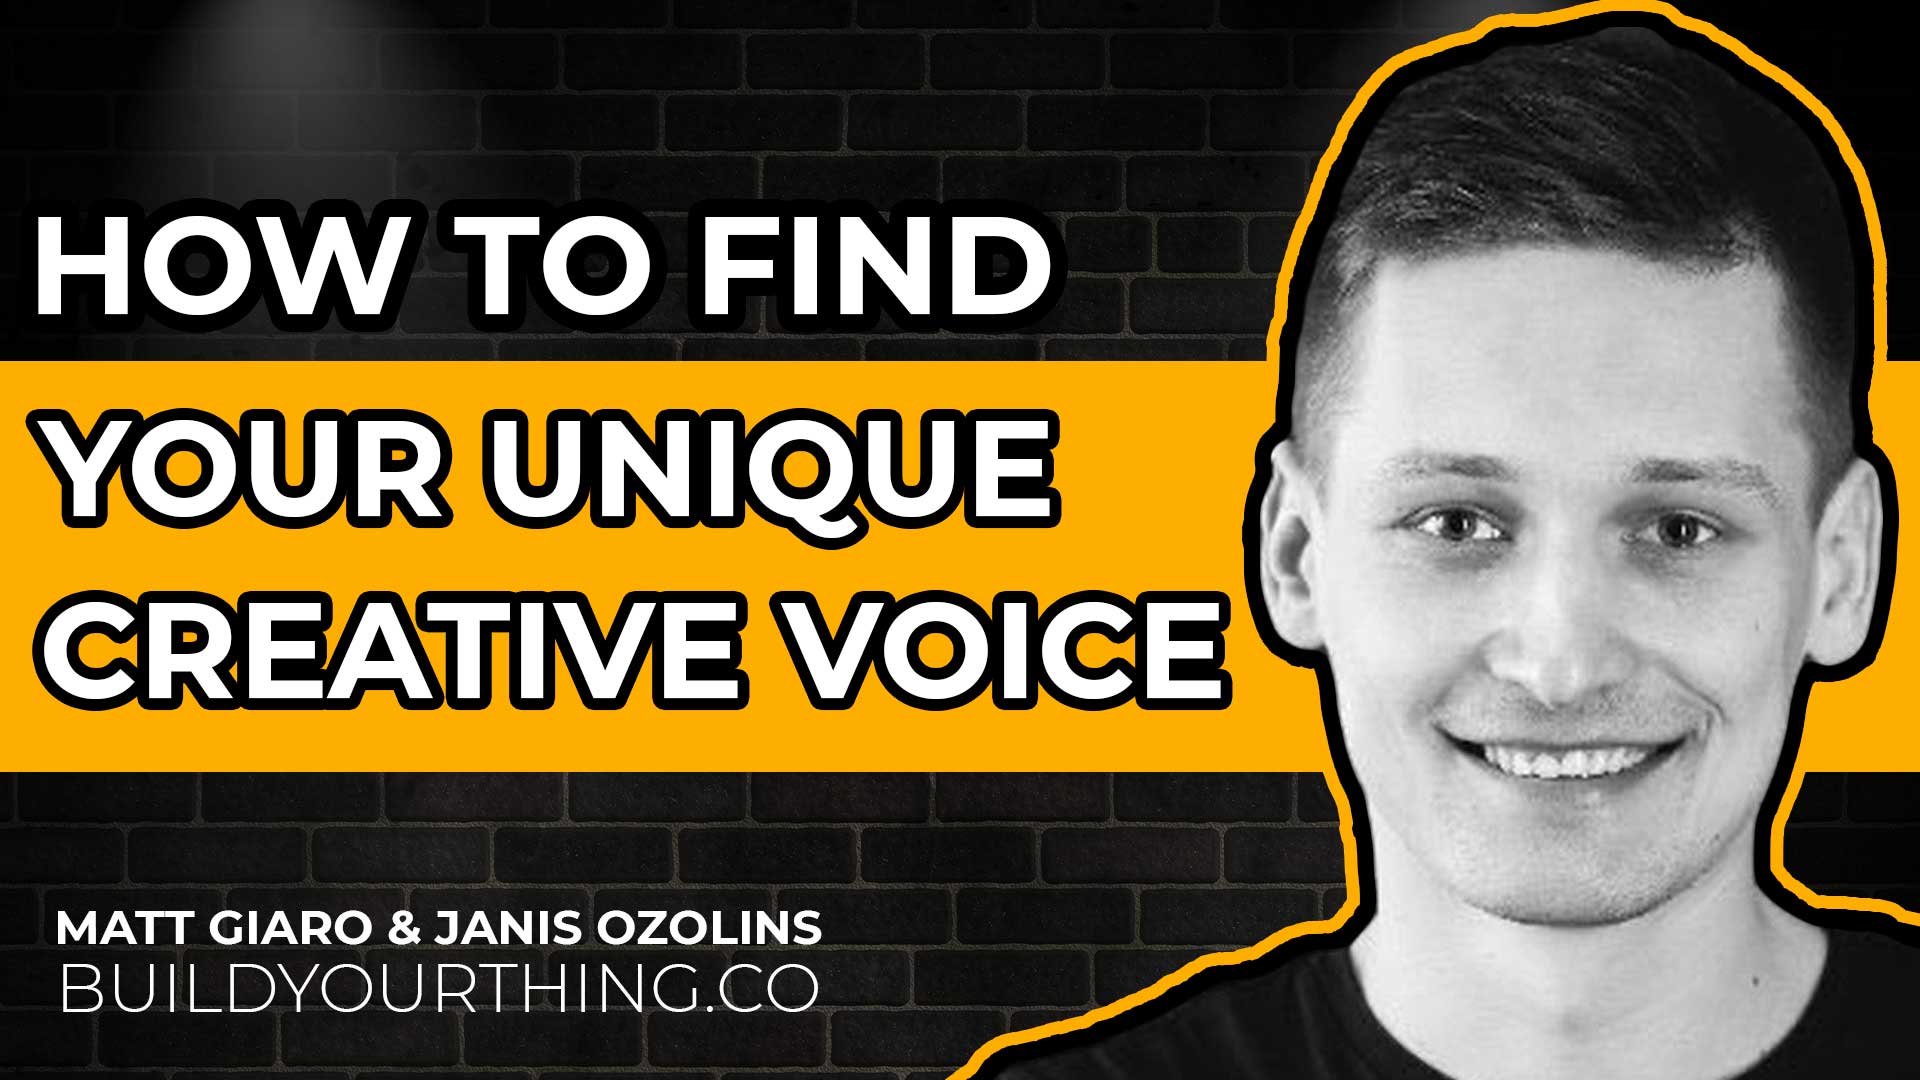 How to Find Your Unique Creative Voice With Janis Ozolins